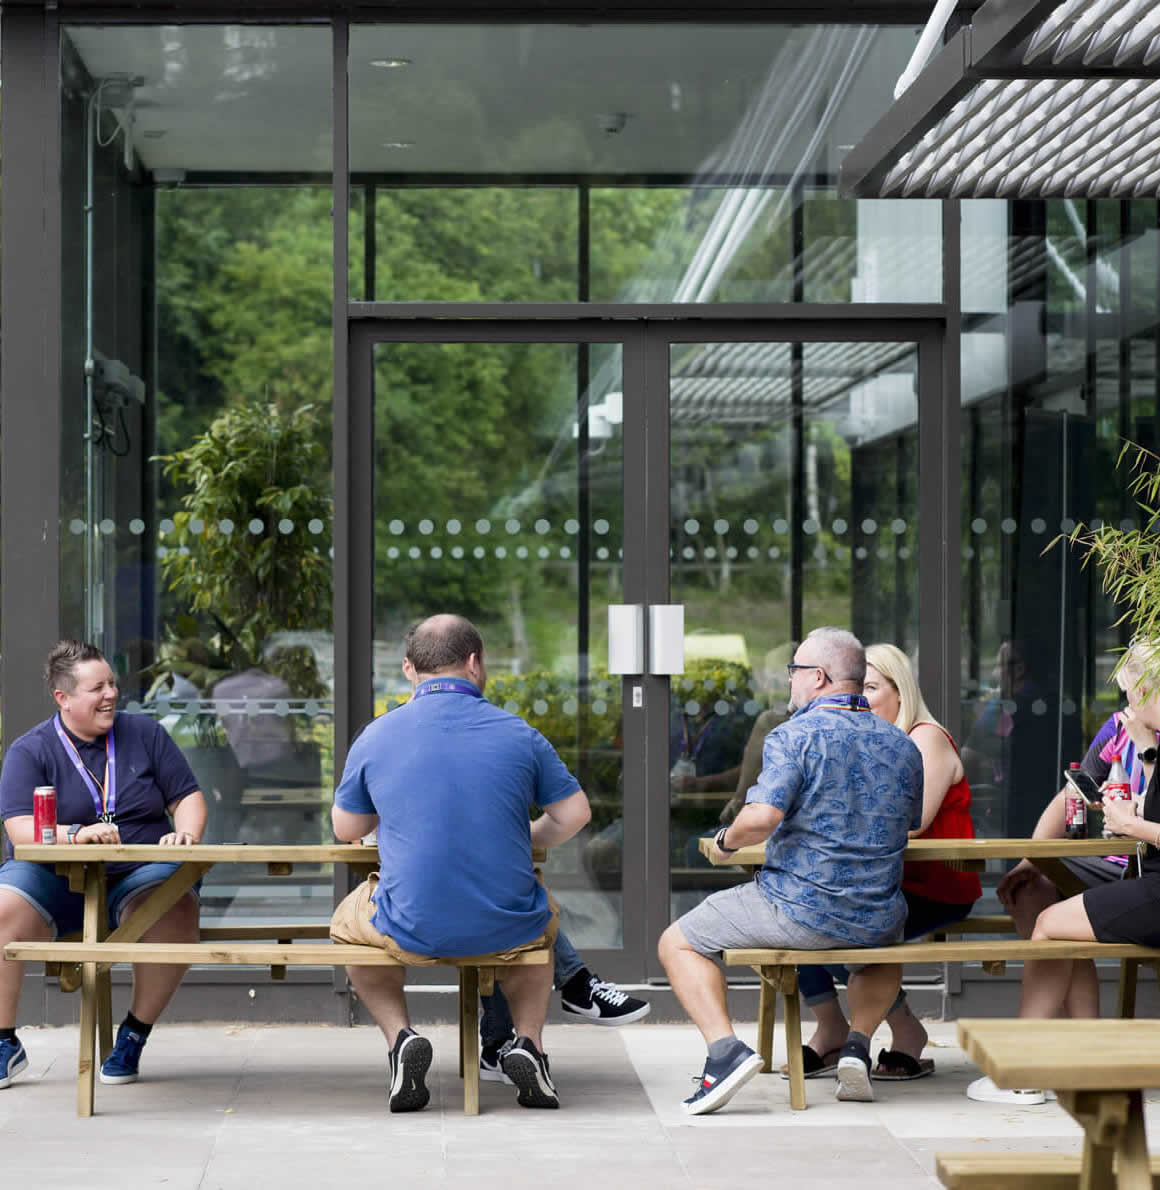 Contact centre colleagues eating lunch outside on bench